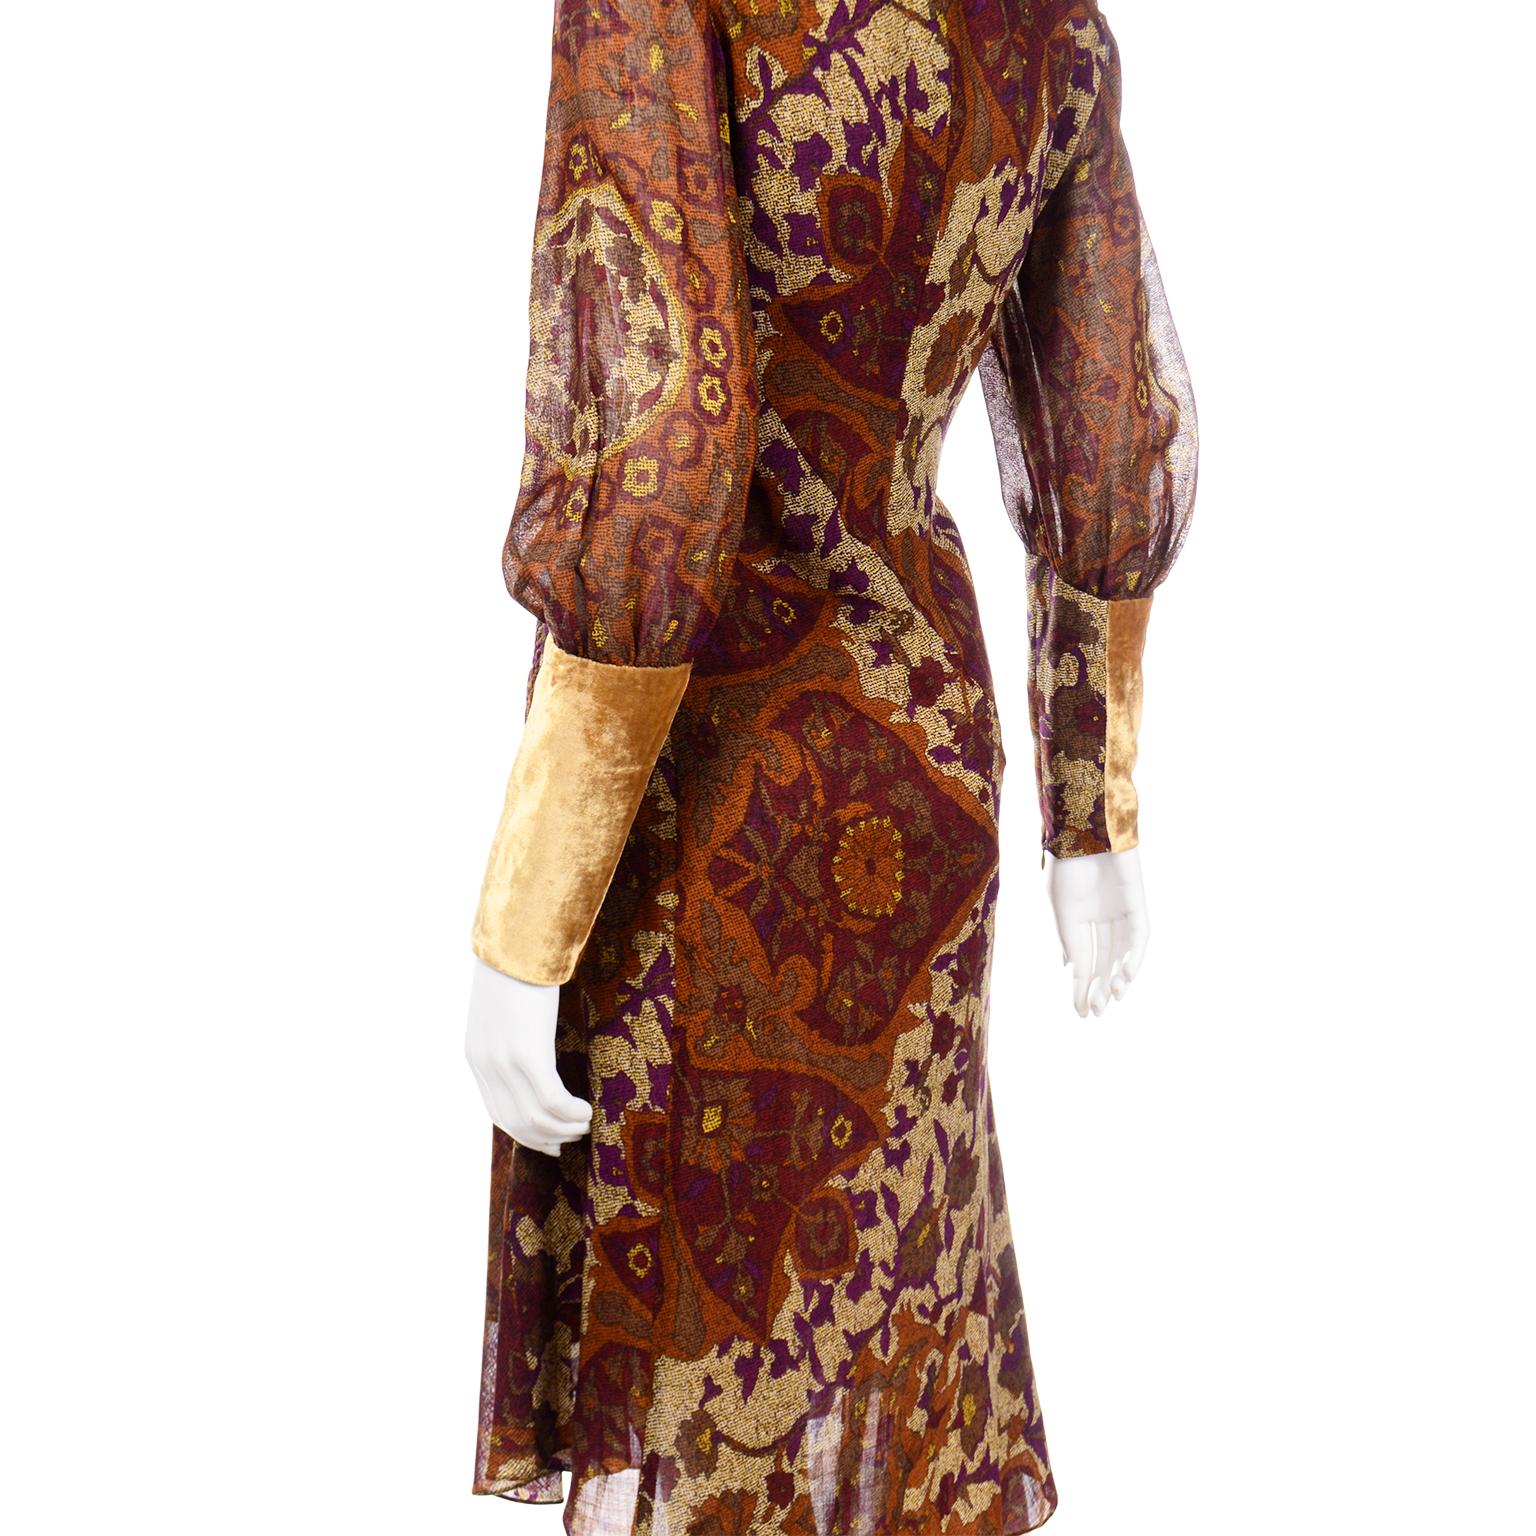 Kenzo Vintage Lush Plum Brown and Gold Floral Print Dress w Gold Velvet Trim For Sale 3